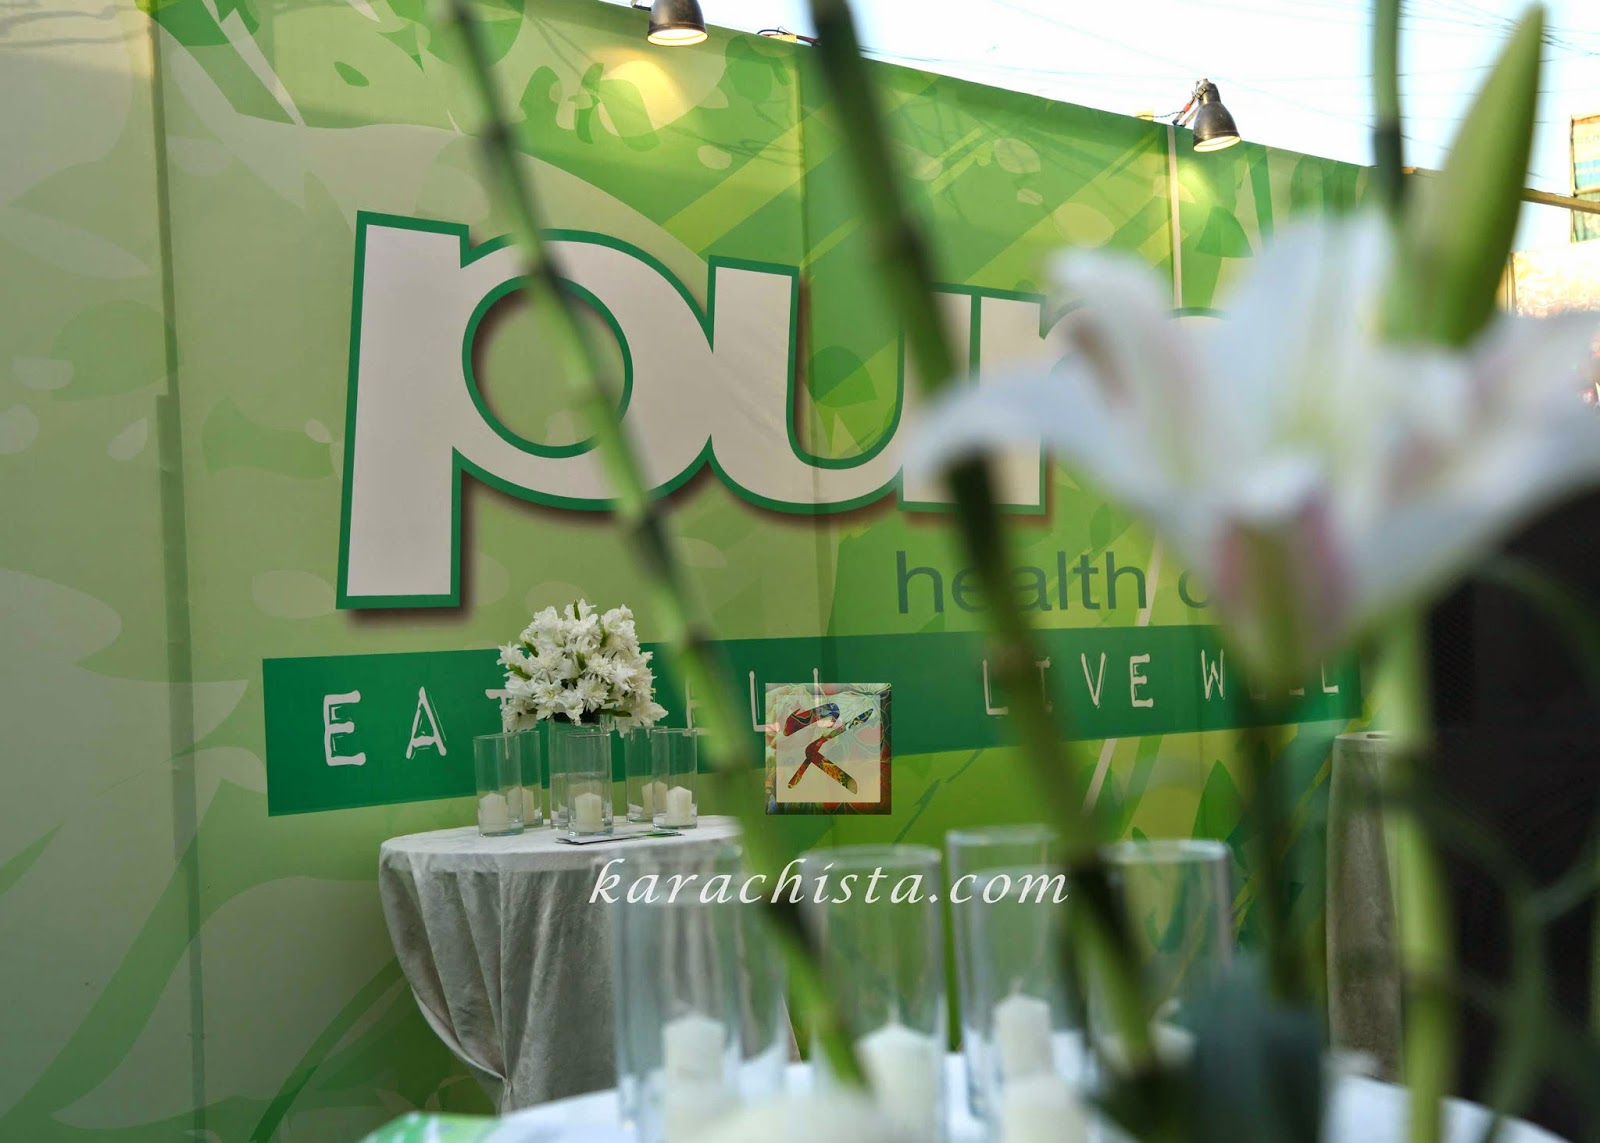 Pure Health Cafe - Healthy eating in Karachi